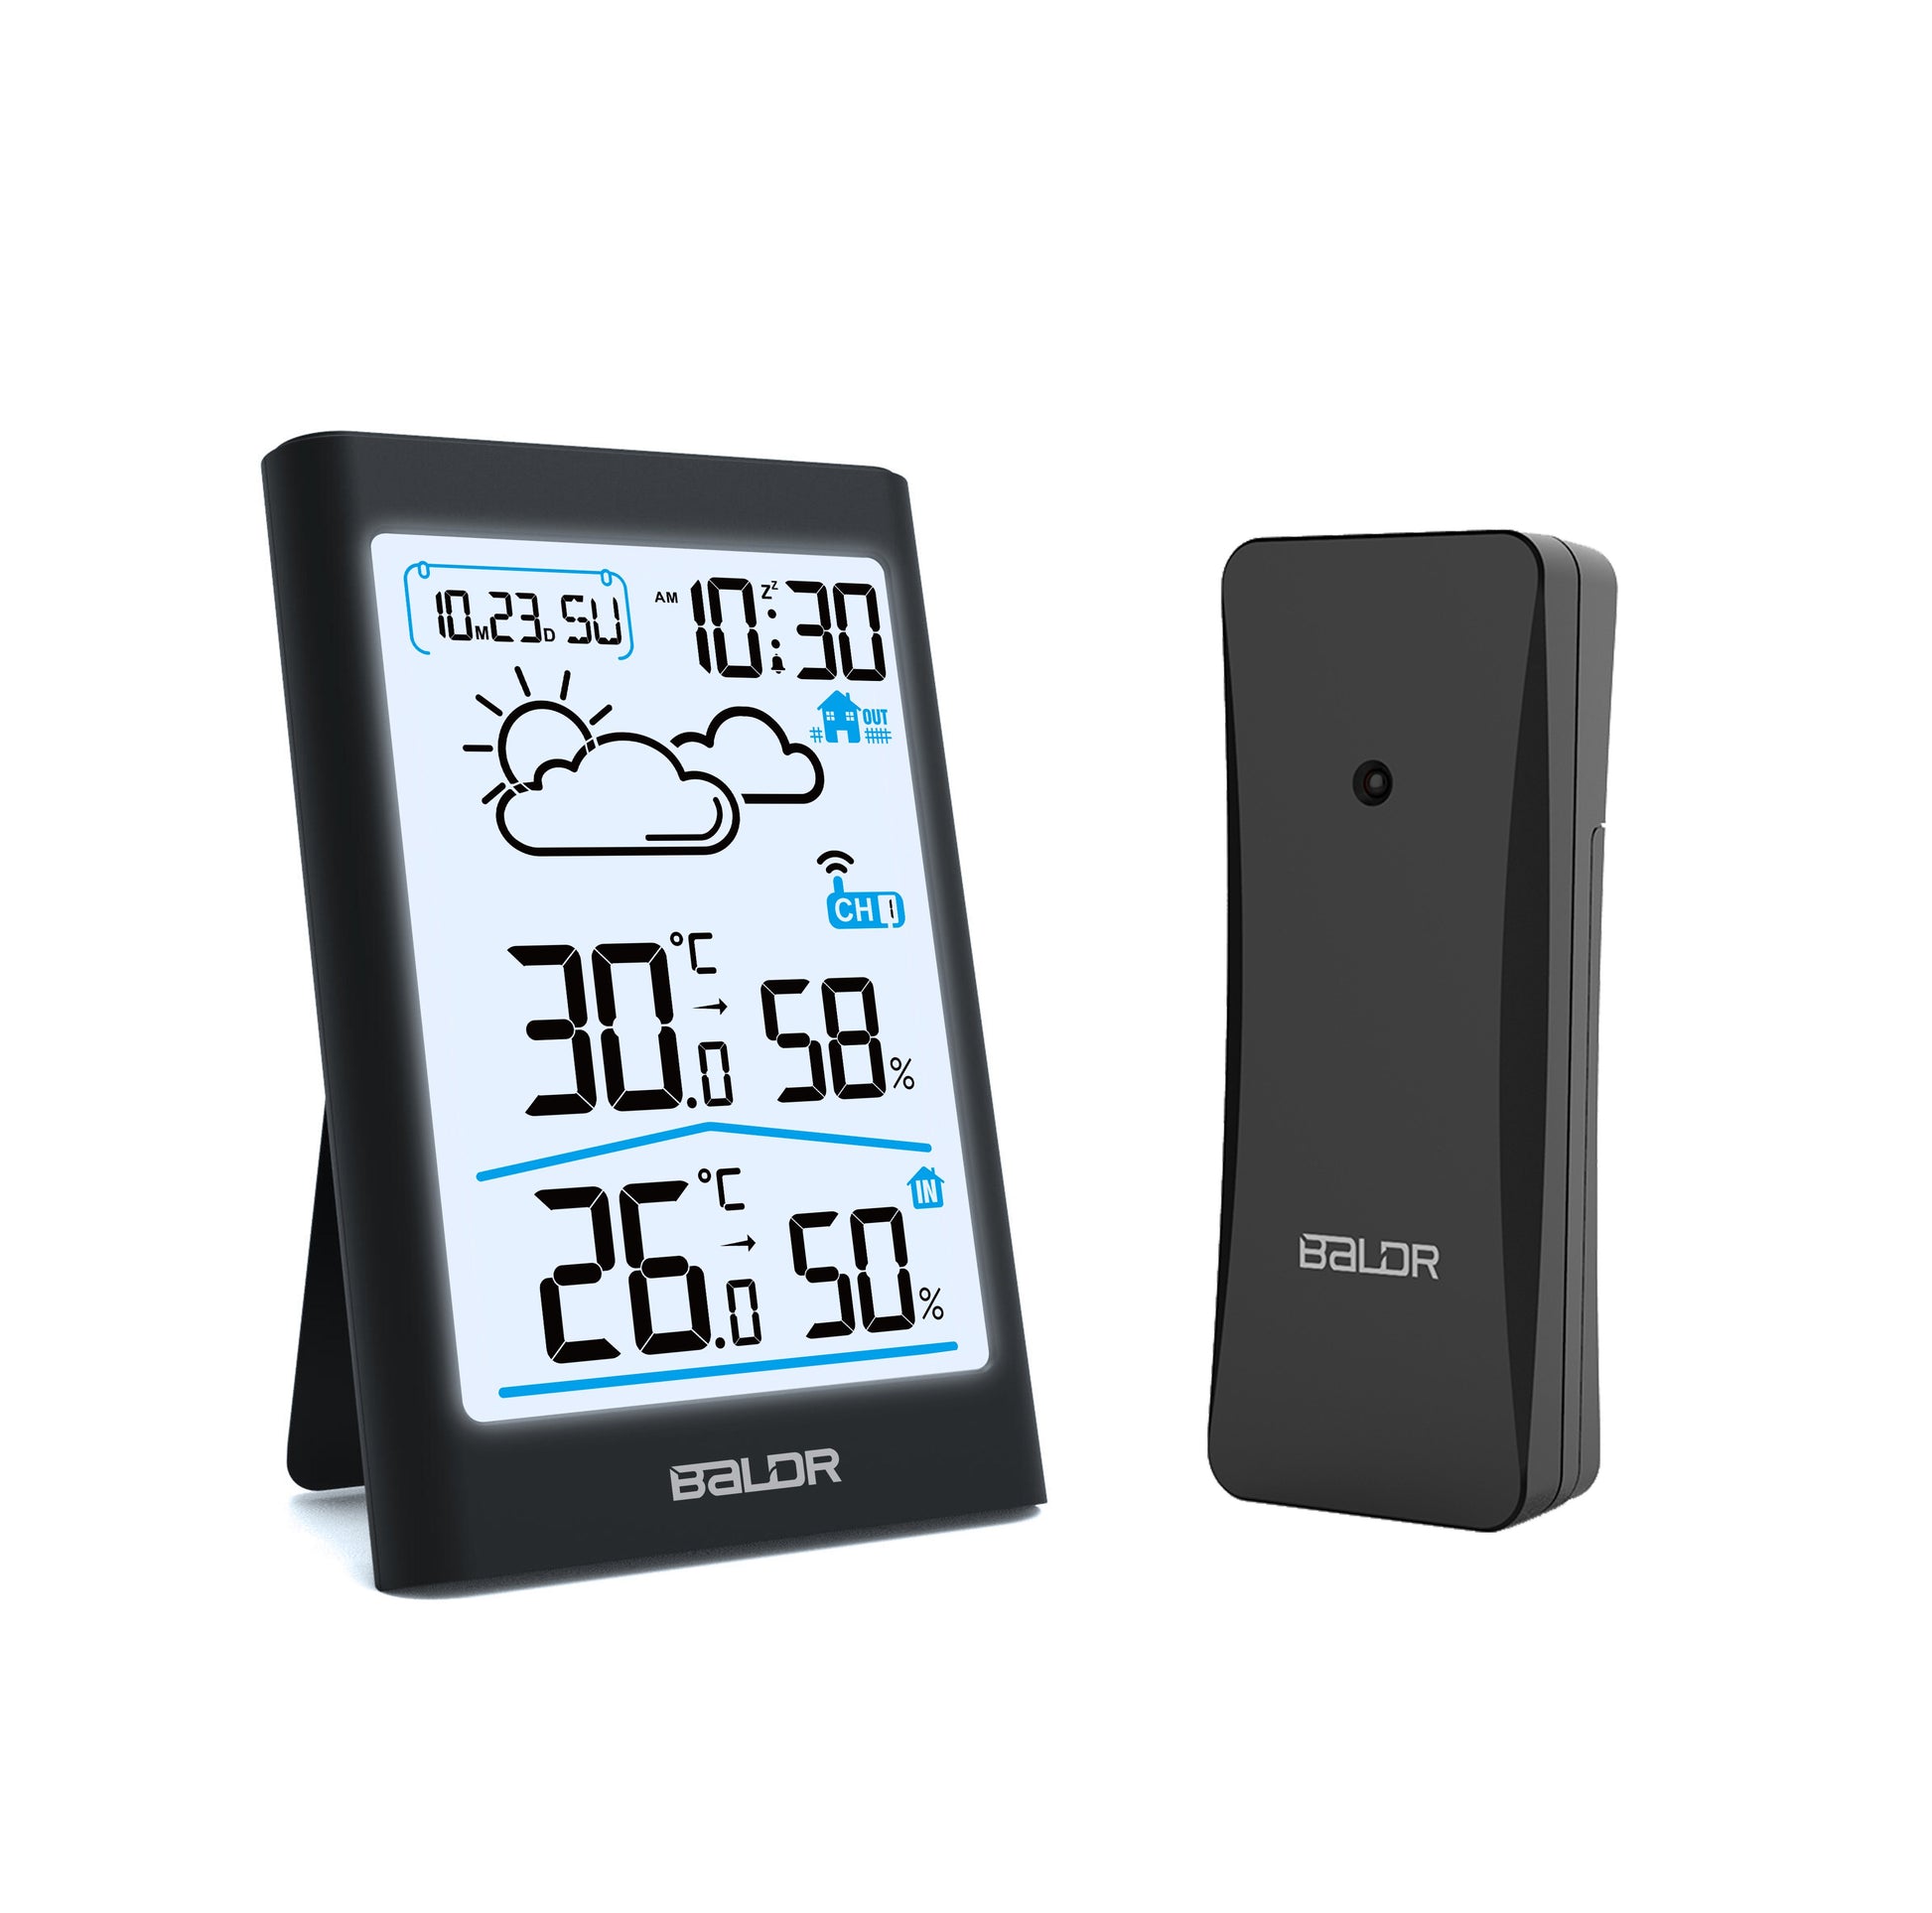 BALDR Wireless Thermometer Weather Station- Home Wireless Weather Stations  for Indoor & Outdoor Uses - with Temperature Monitor, Humidity Gauge, Time  & Date Display, White Blacklight LCD (Black)